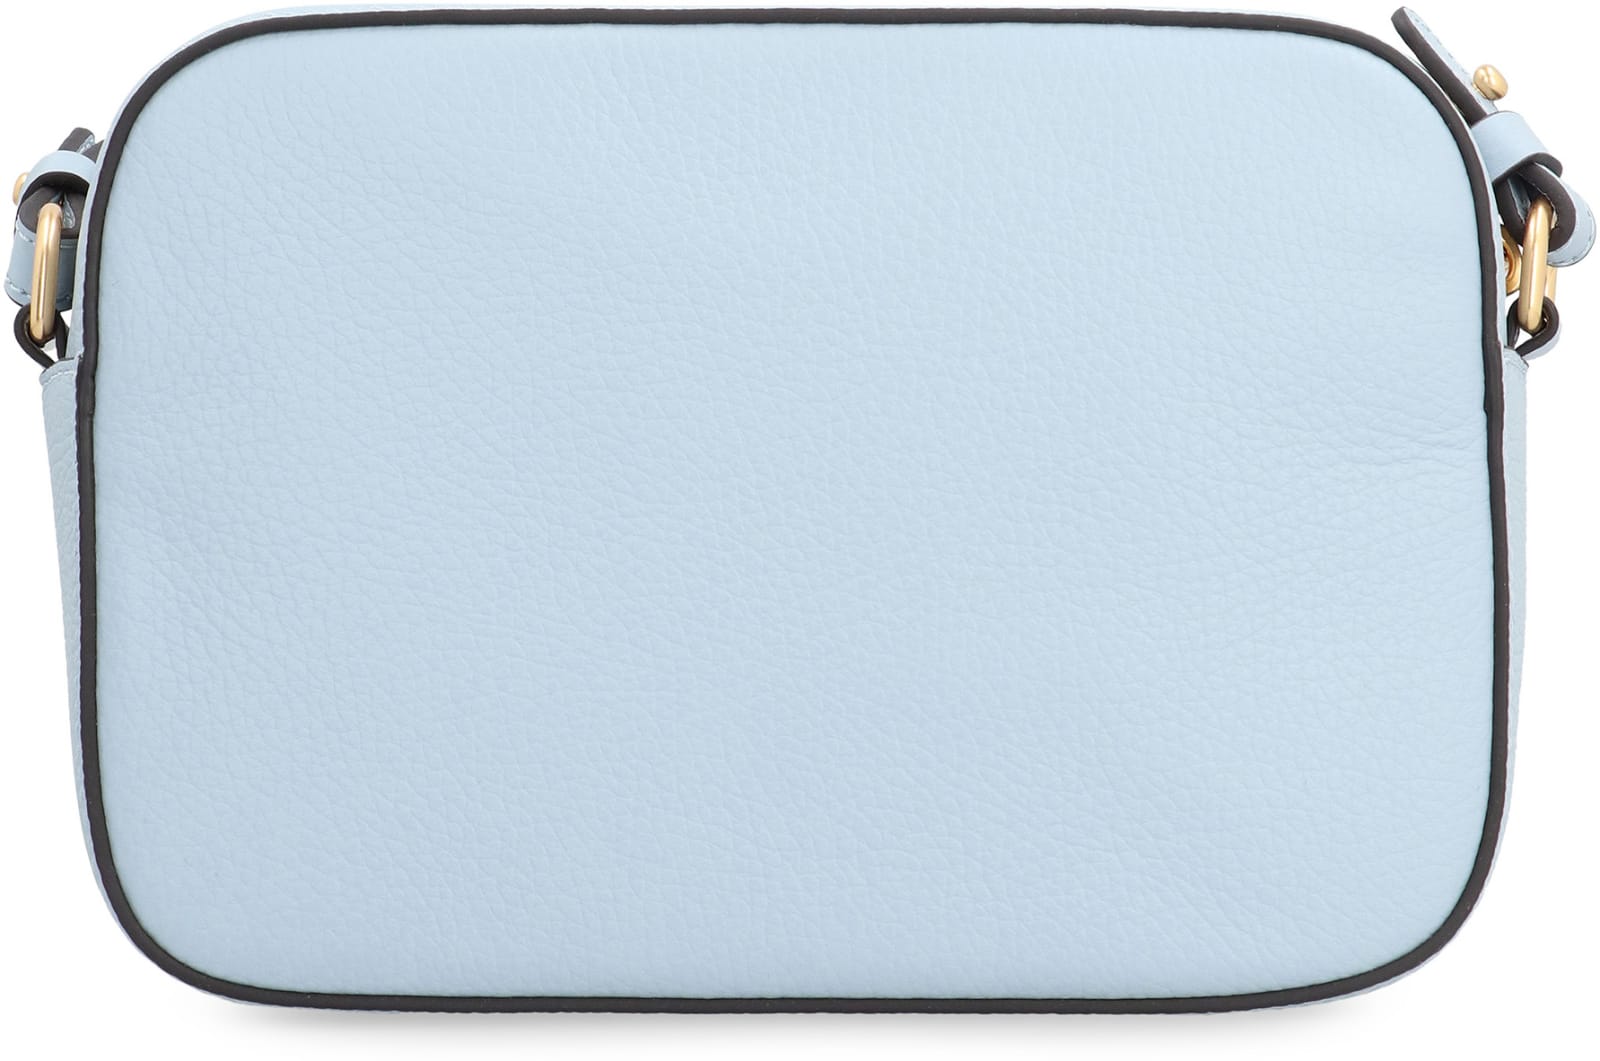 Shop Coccinelle Beat Soft Leather Crossbody Bag In Mist Blue